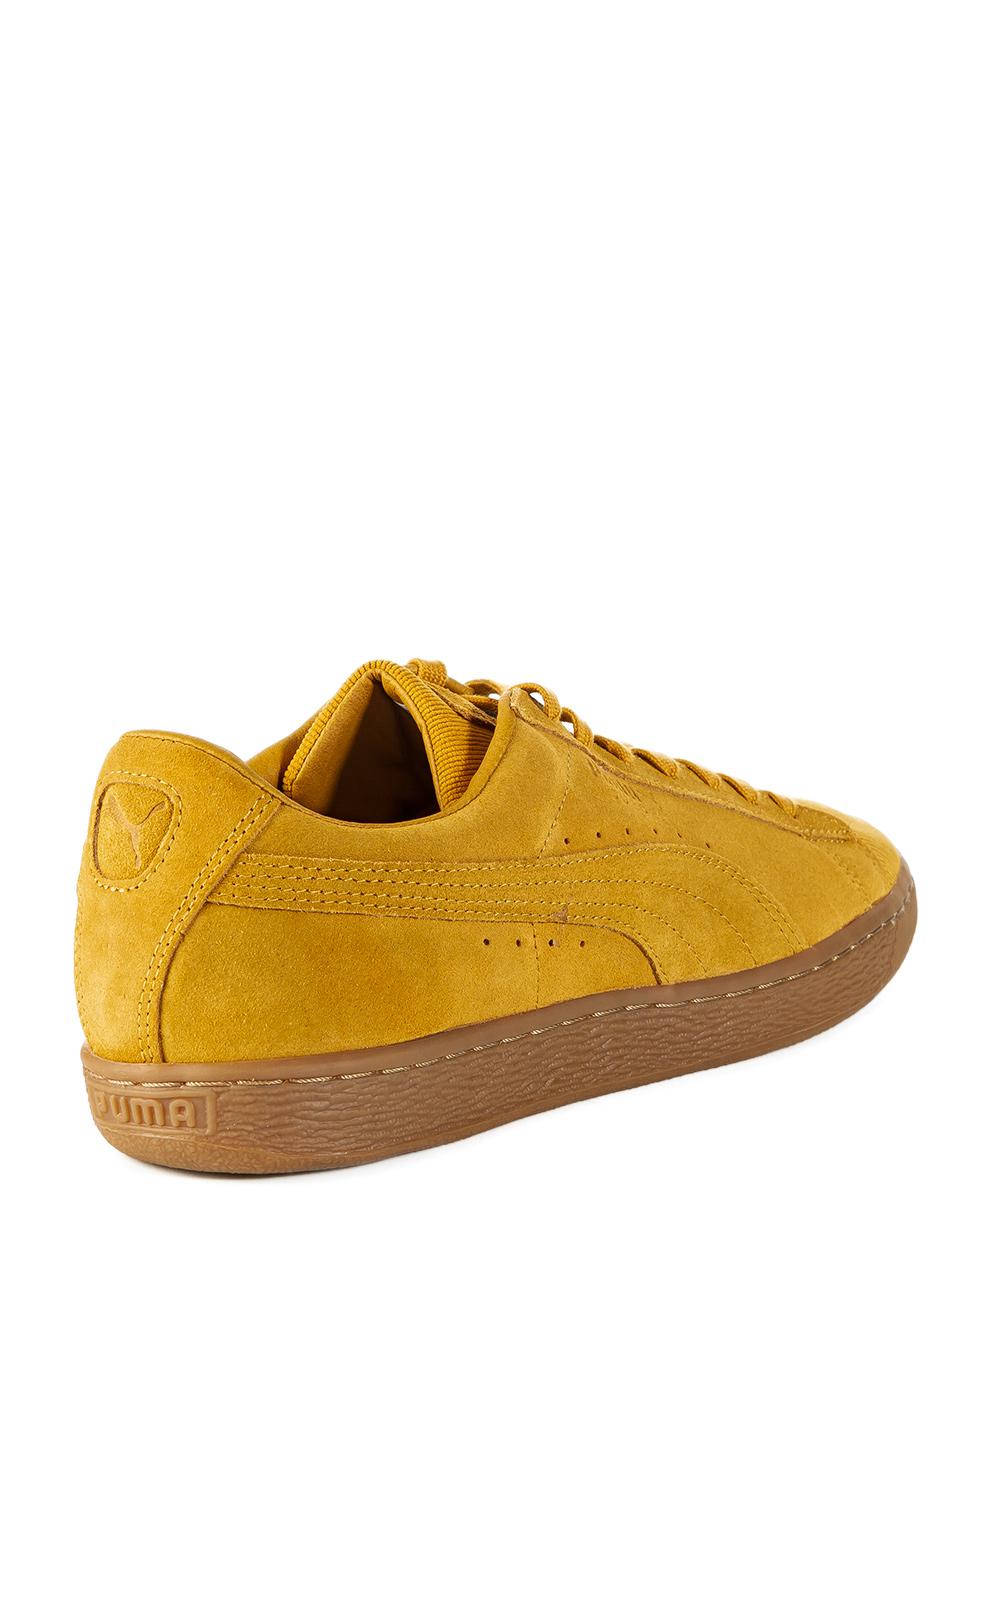 PUMA Suede Classic Pincord/brown for 